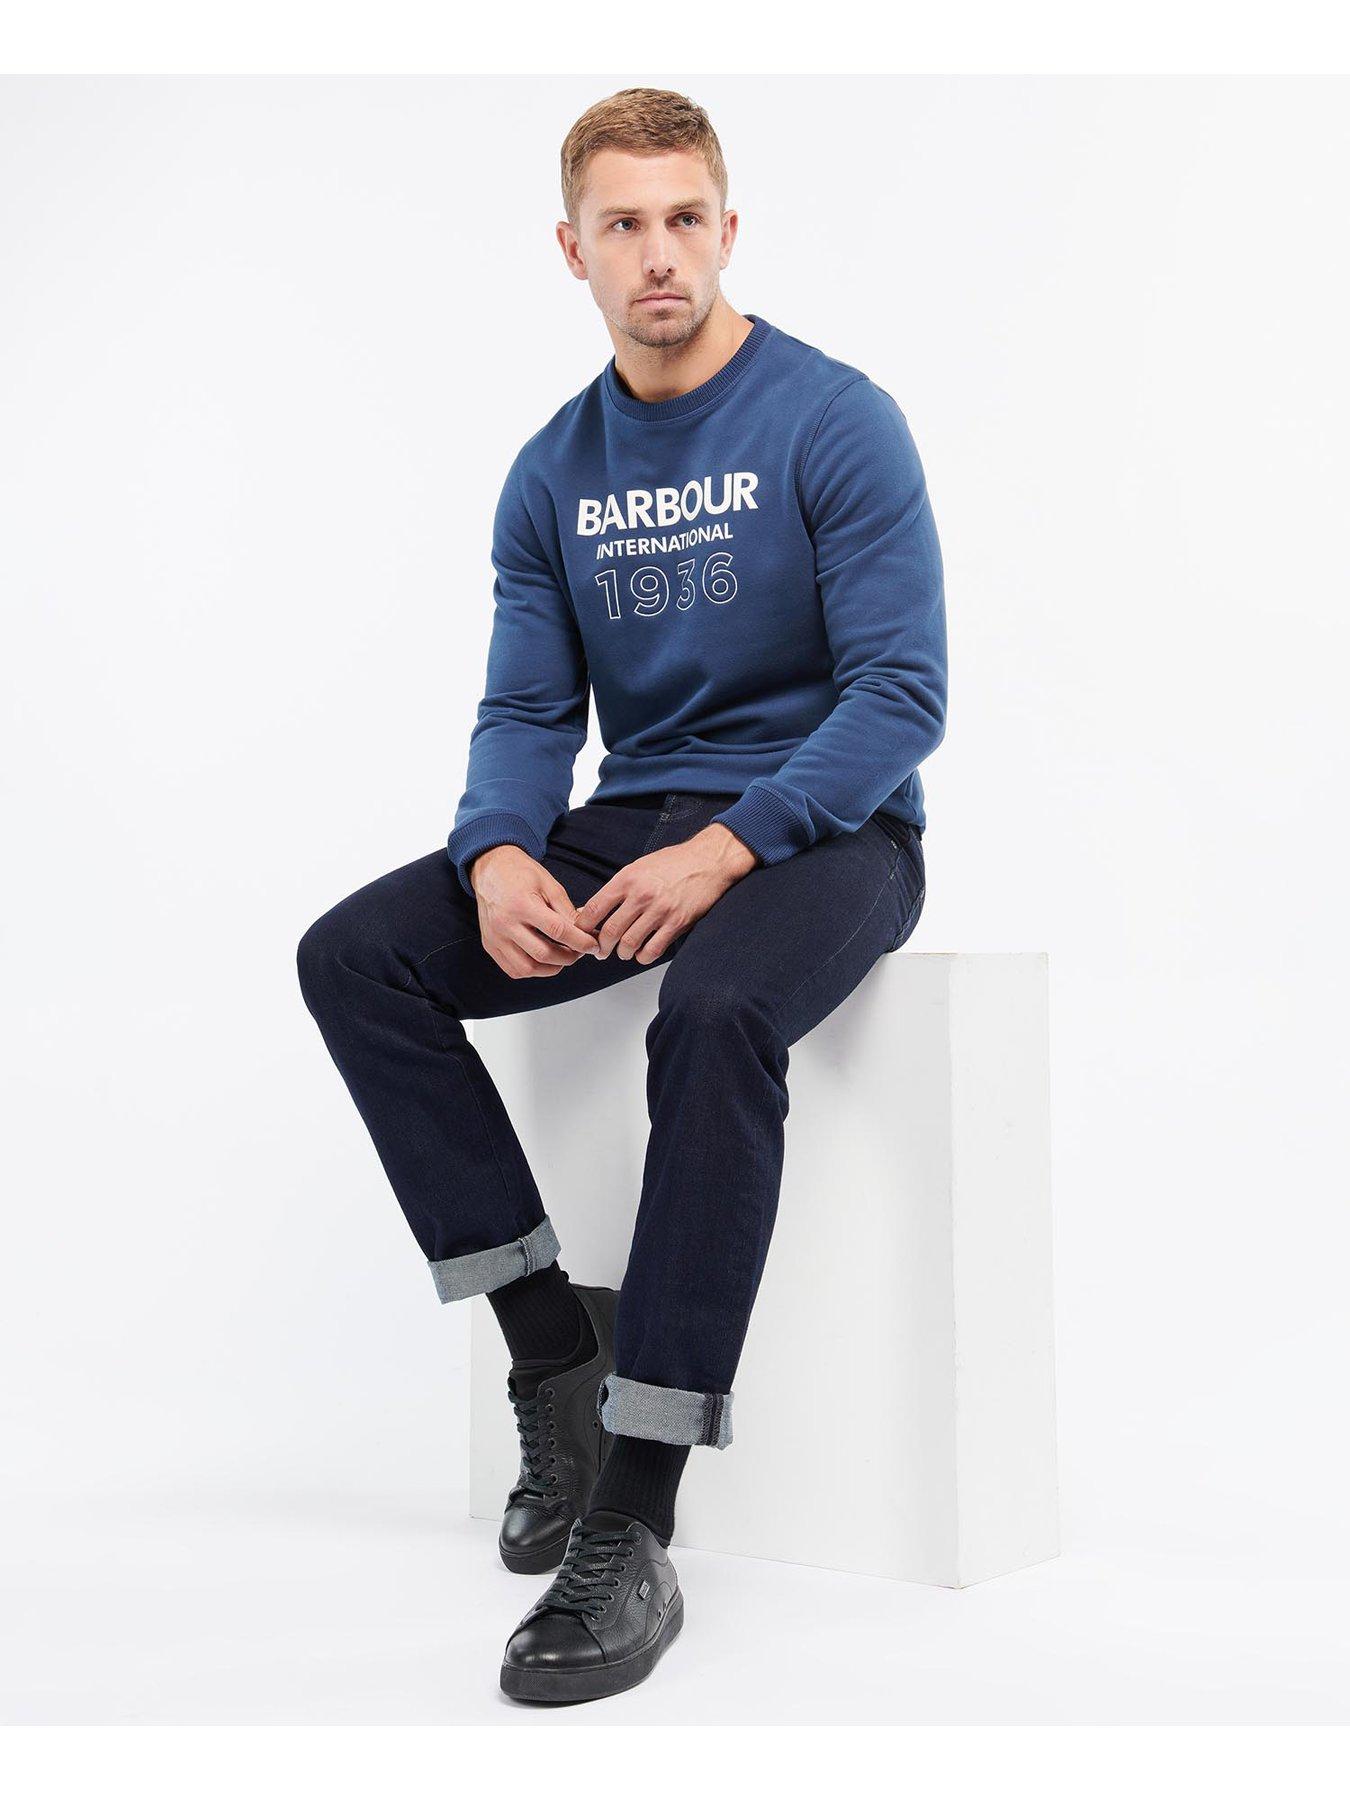  Barbour International Charge Chest Logo Sweat